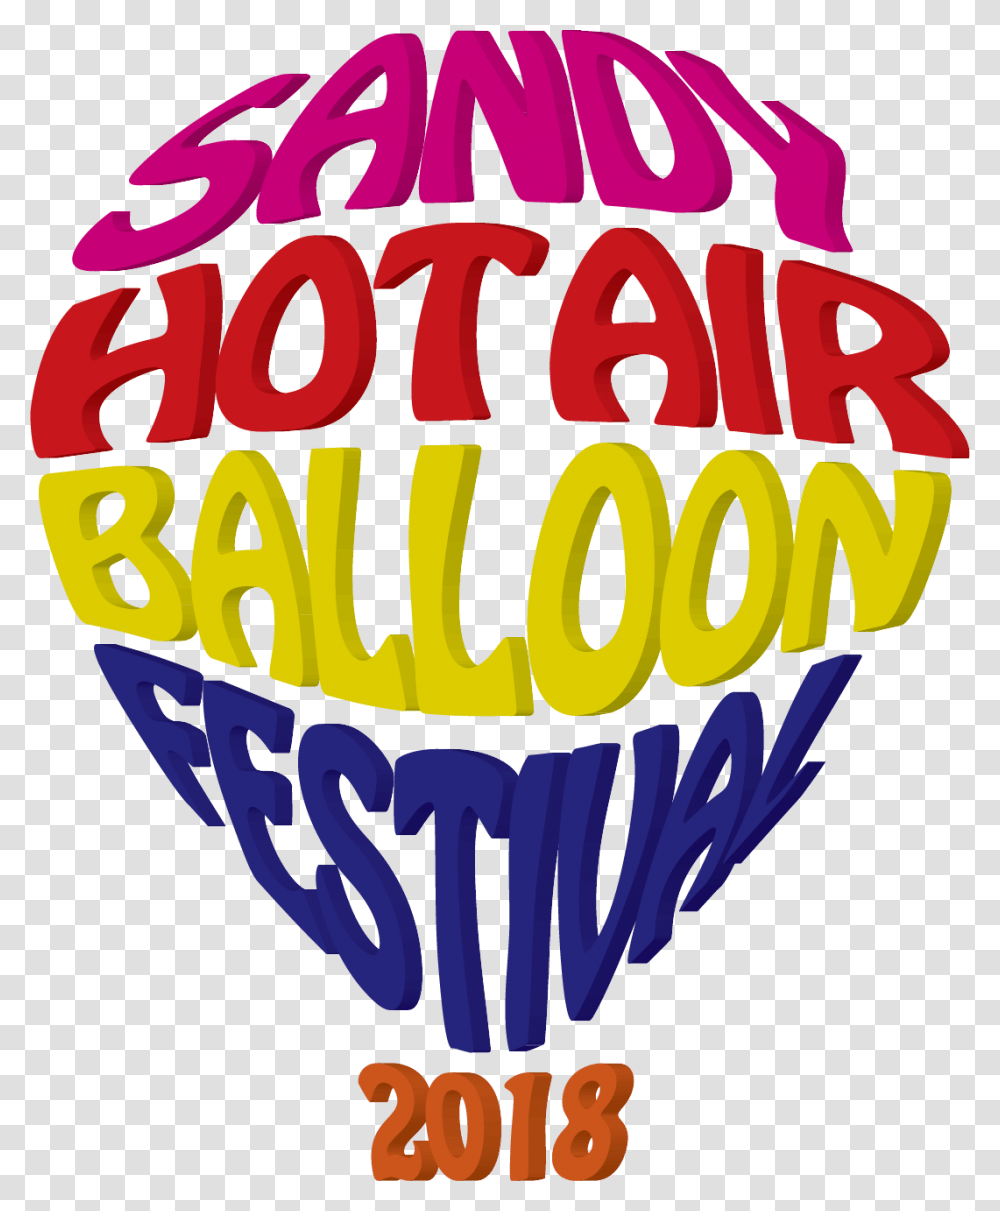 Sandy Hot Air Balloon Festival 2018 Presented By Sandy Sandy Balloon Festival 2018, Word, Dynamite, Alphabet Transparent Png